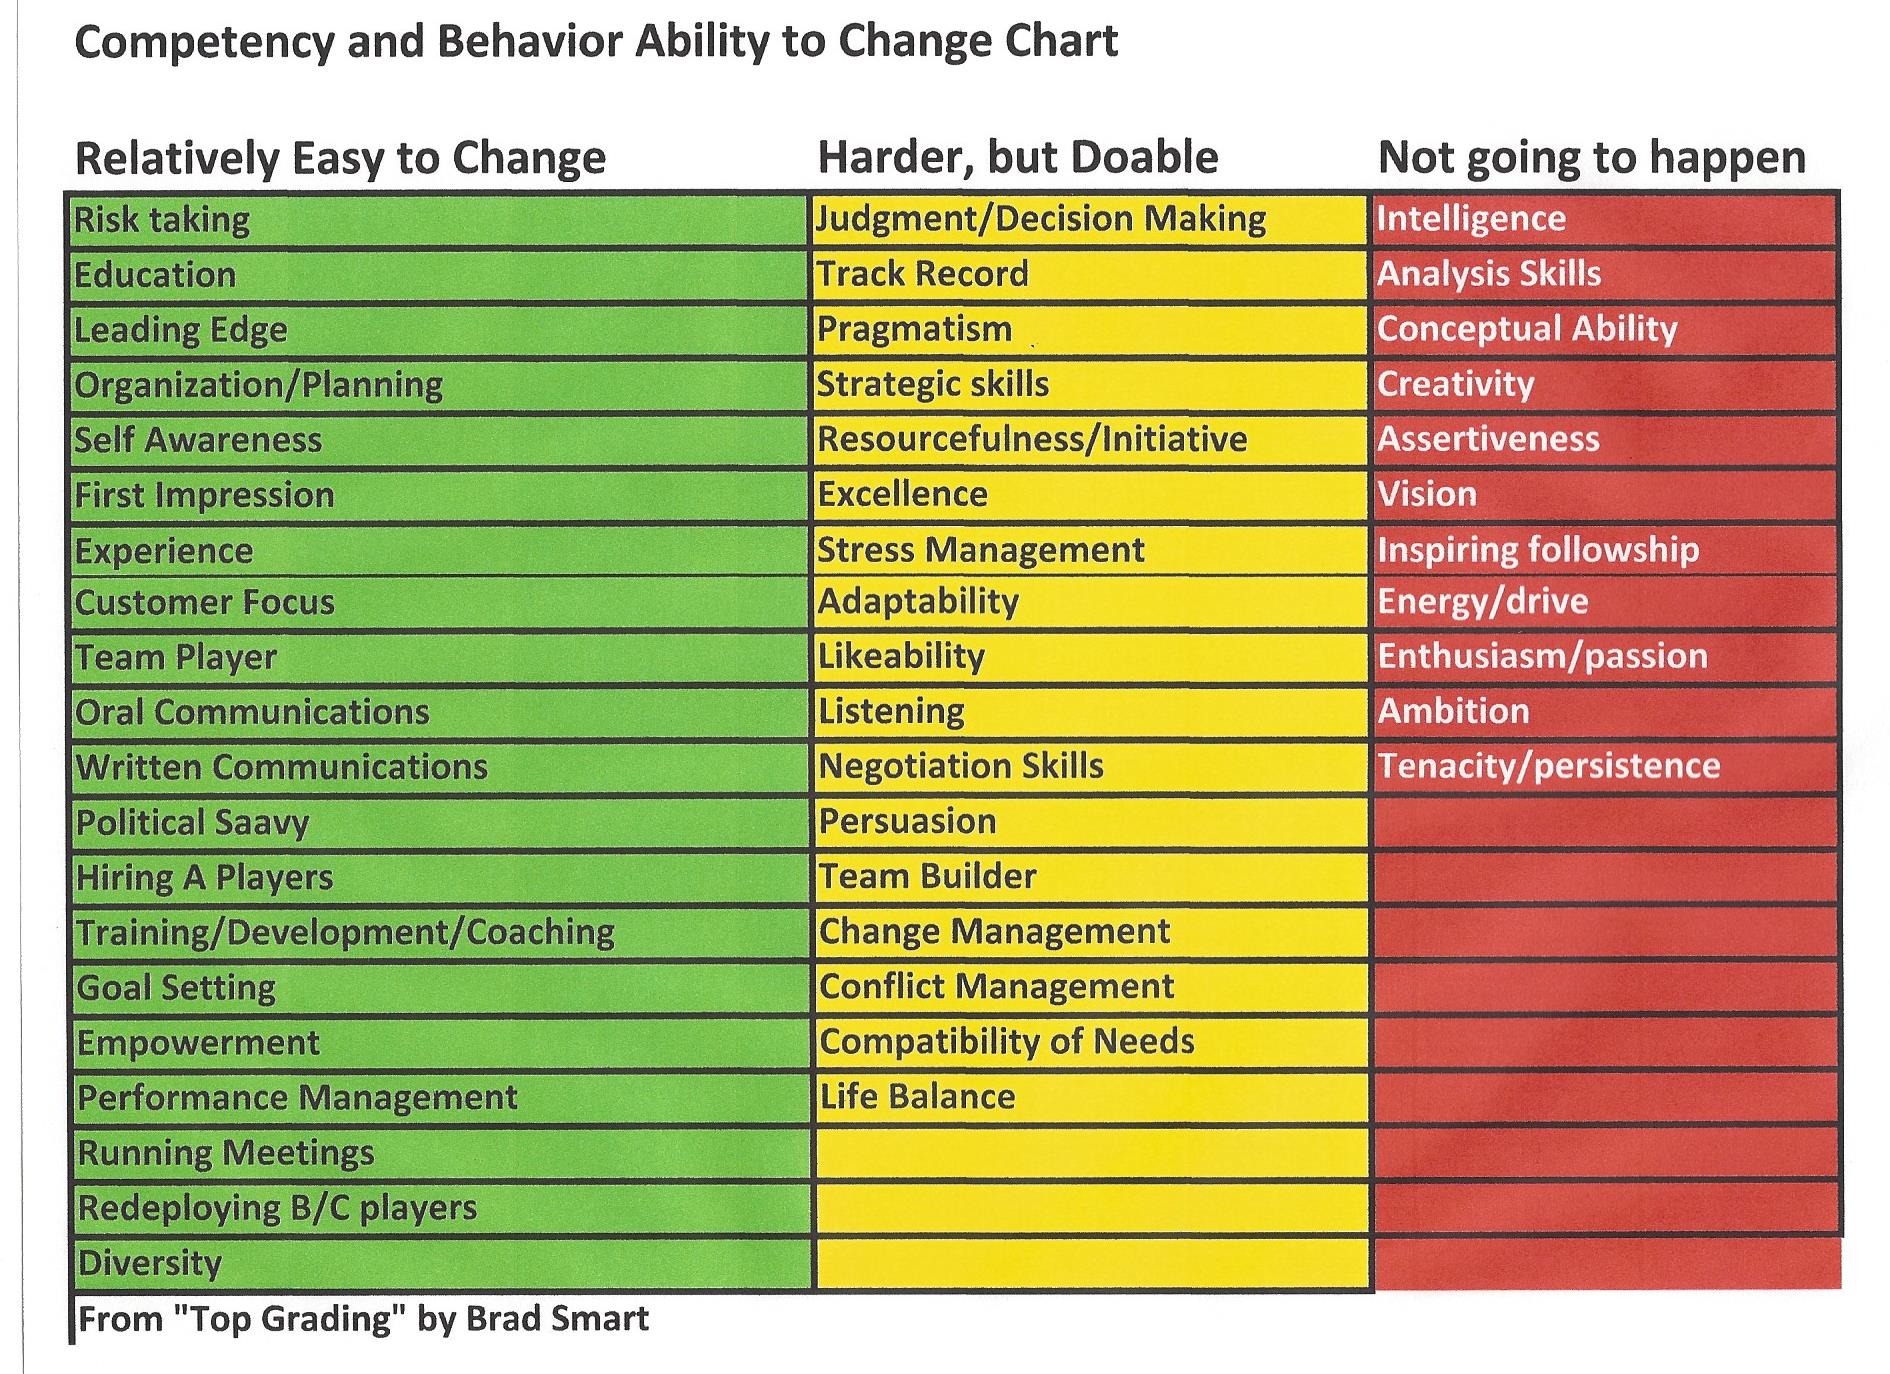 Competency and behavior ability to change chart